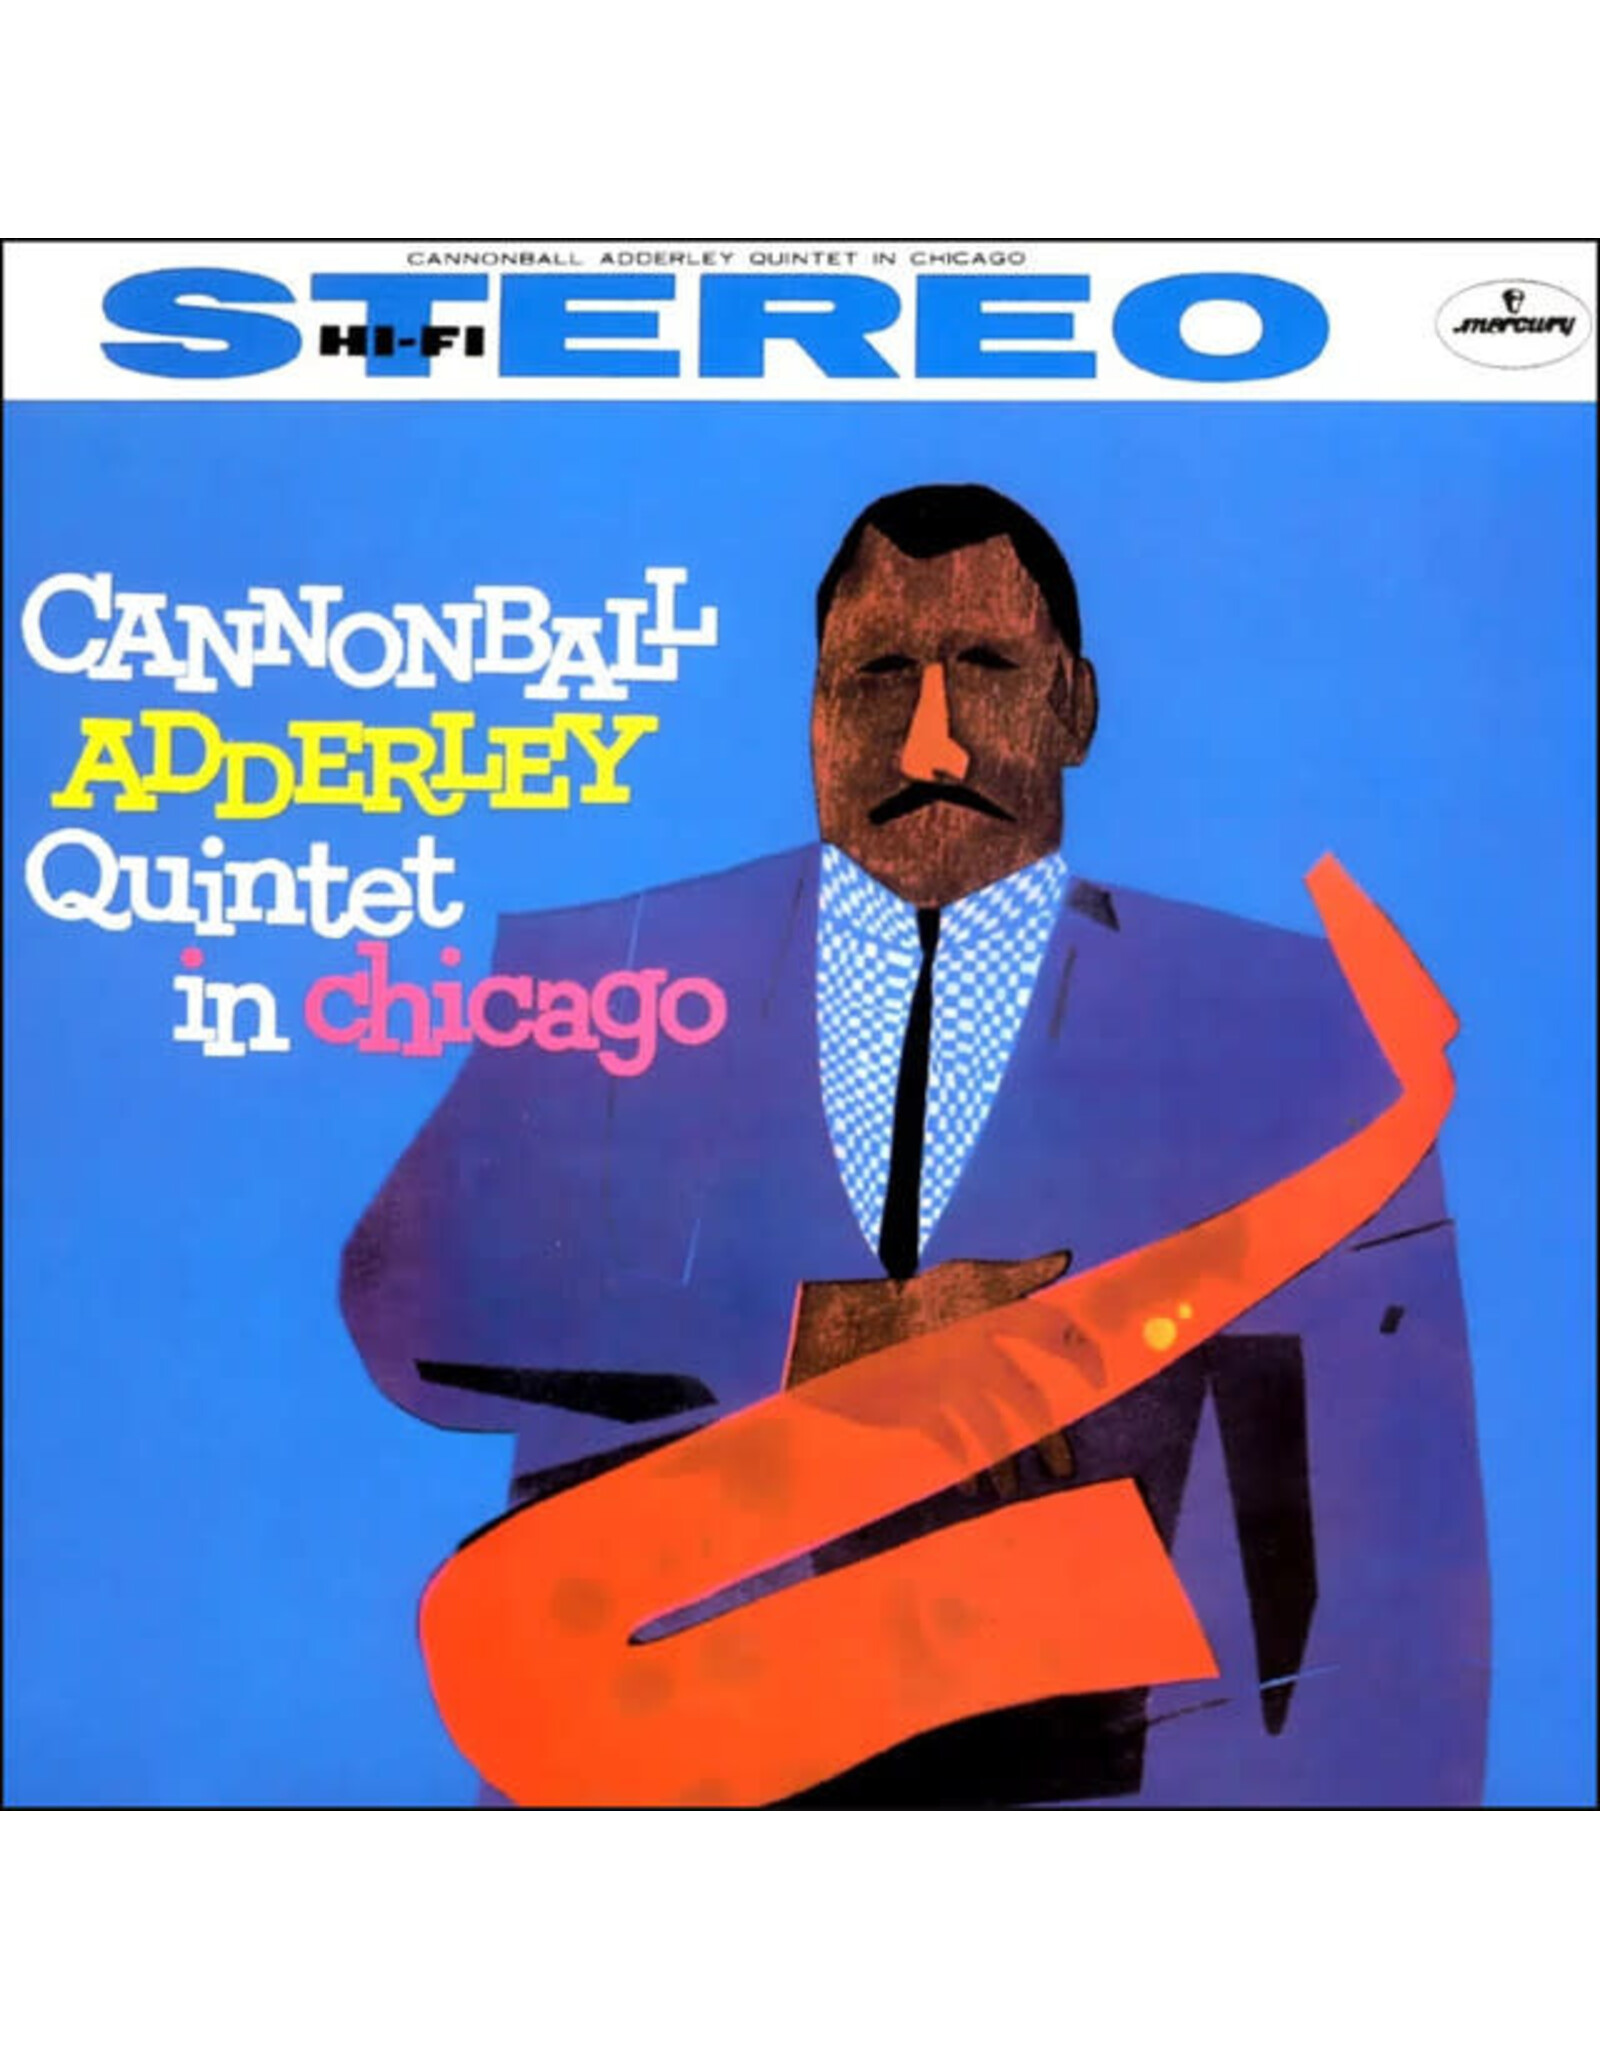 Verve Adderley, Cannonball: In Chicago (Acoustic Sounds) LP